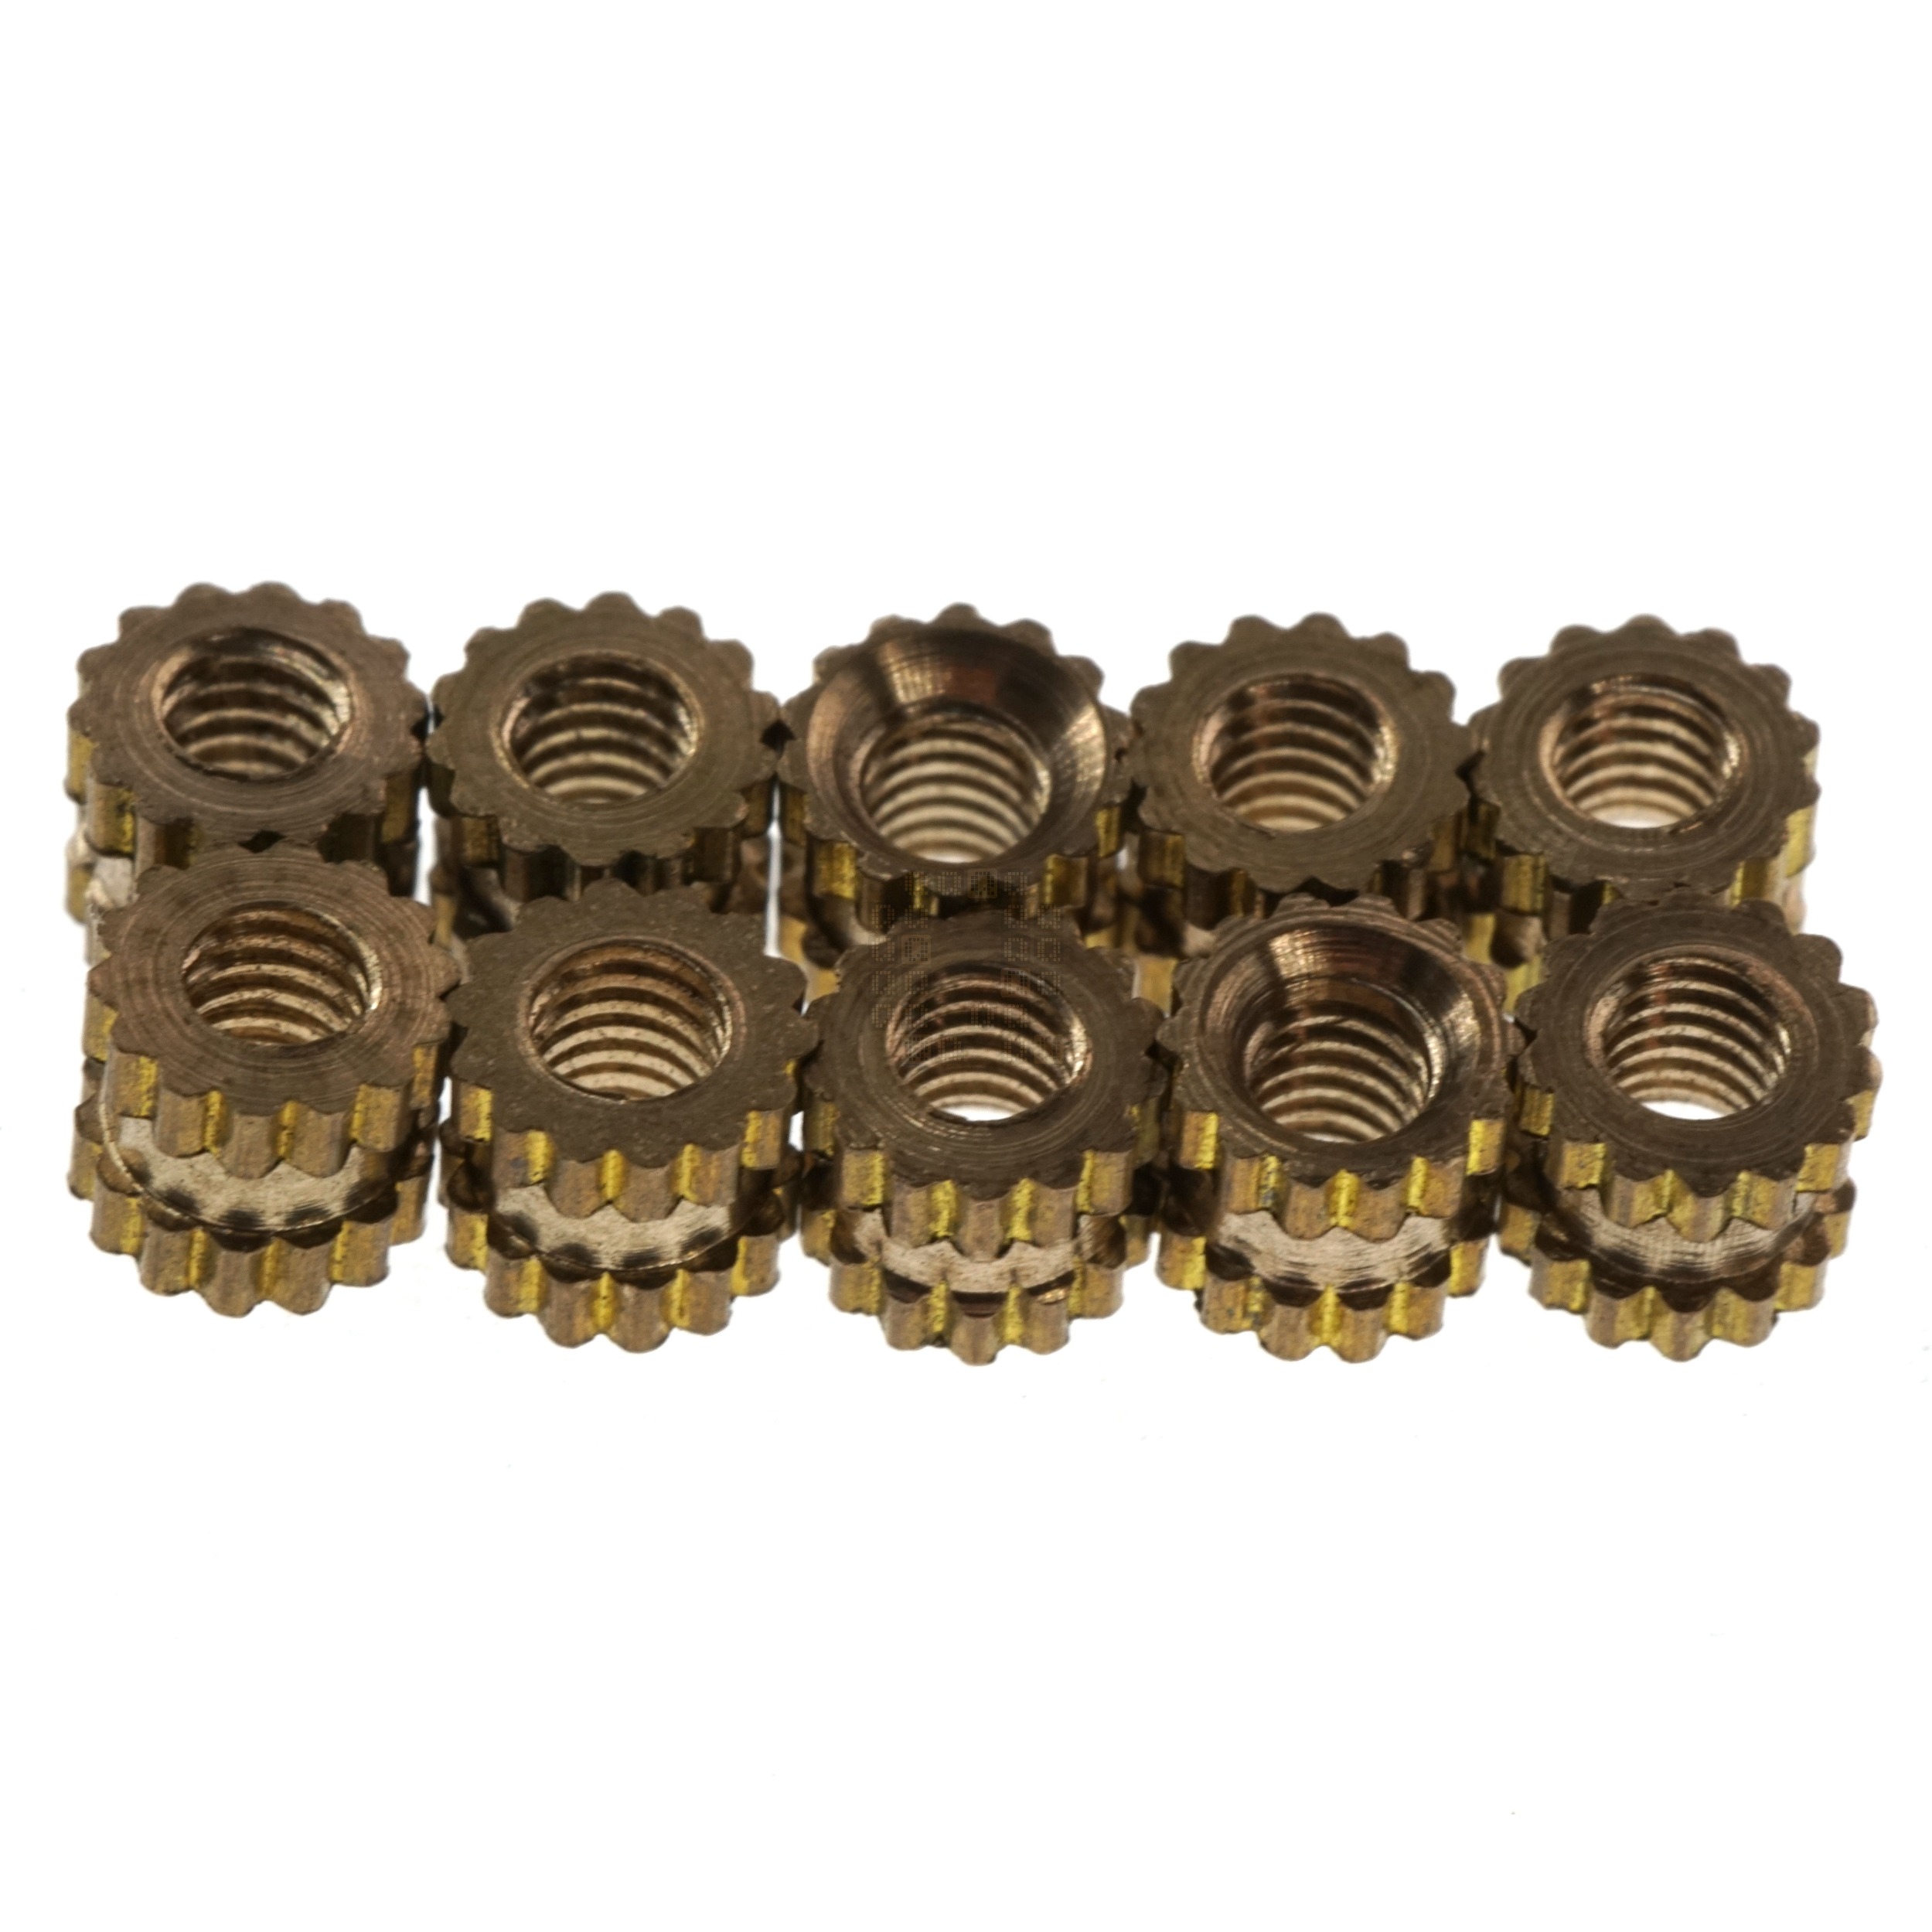 M2-0.40 Brass Injection Molding Knurled Nut, 3.5mm OD, 3mm Height, 10-Pack